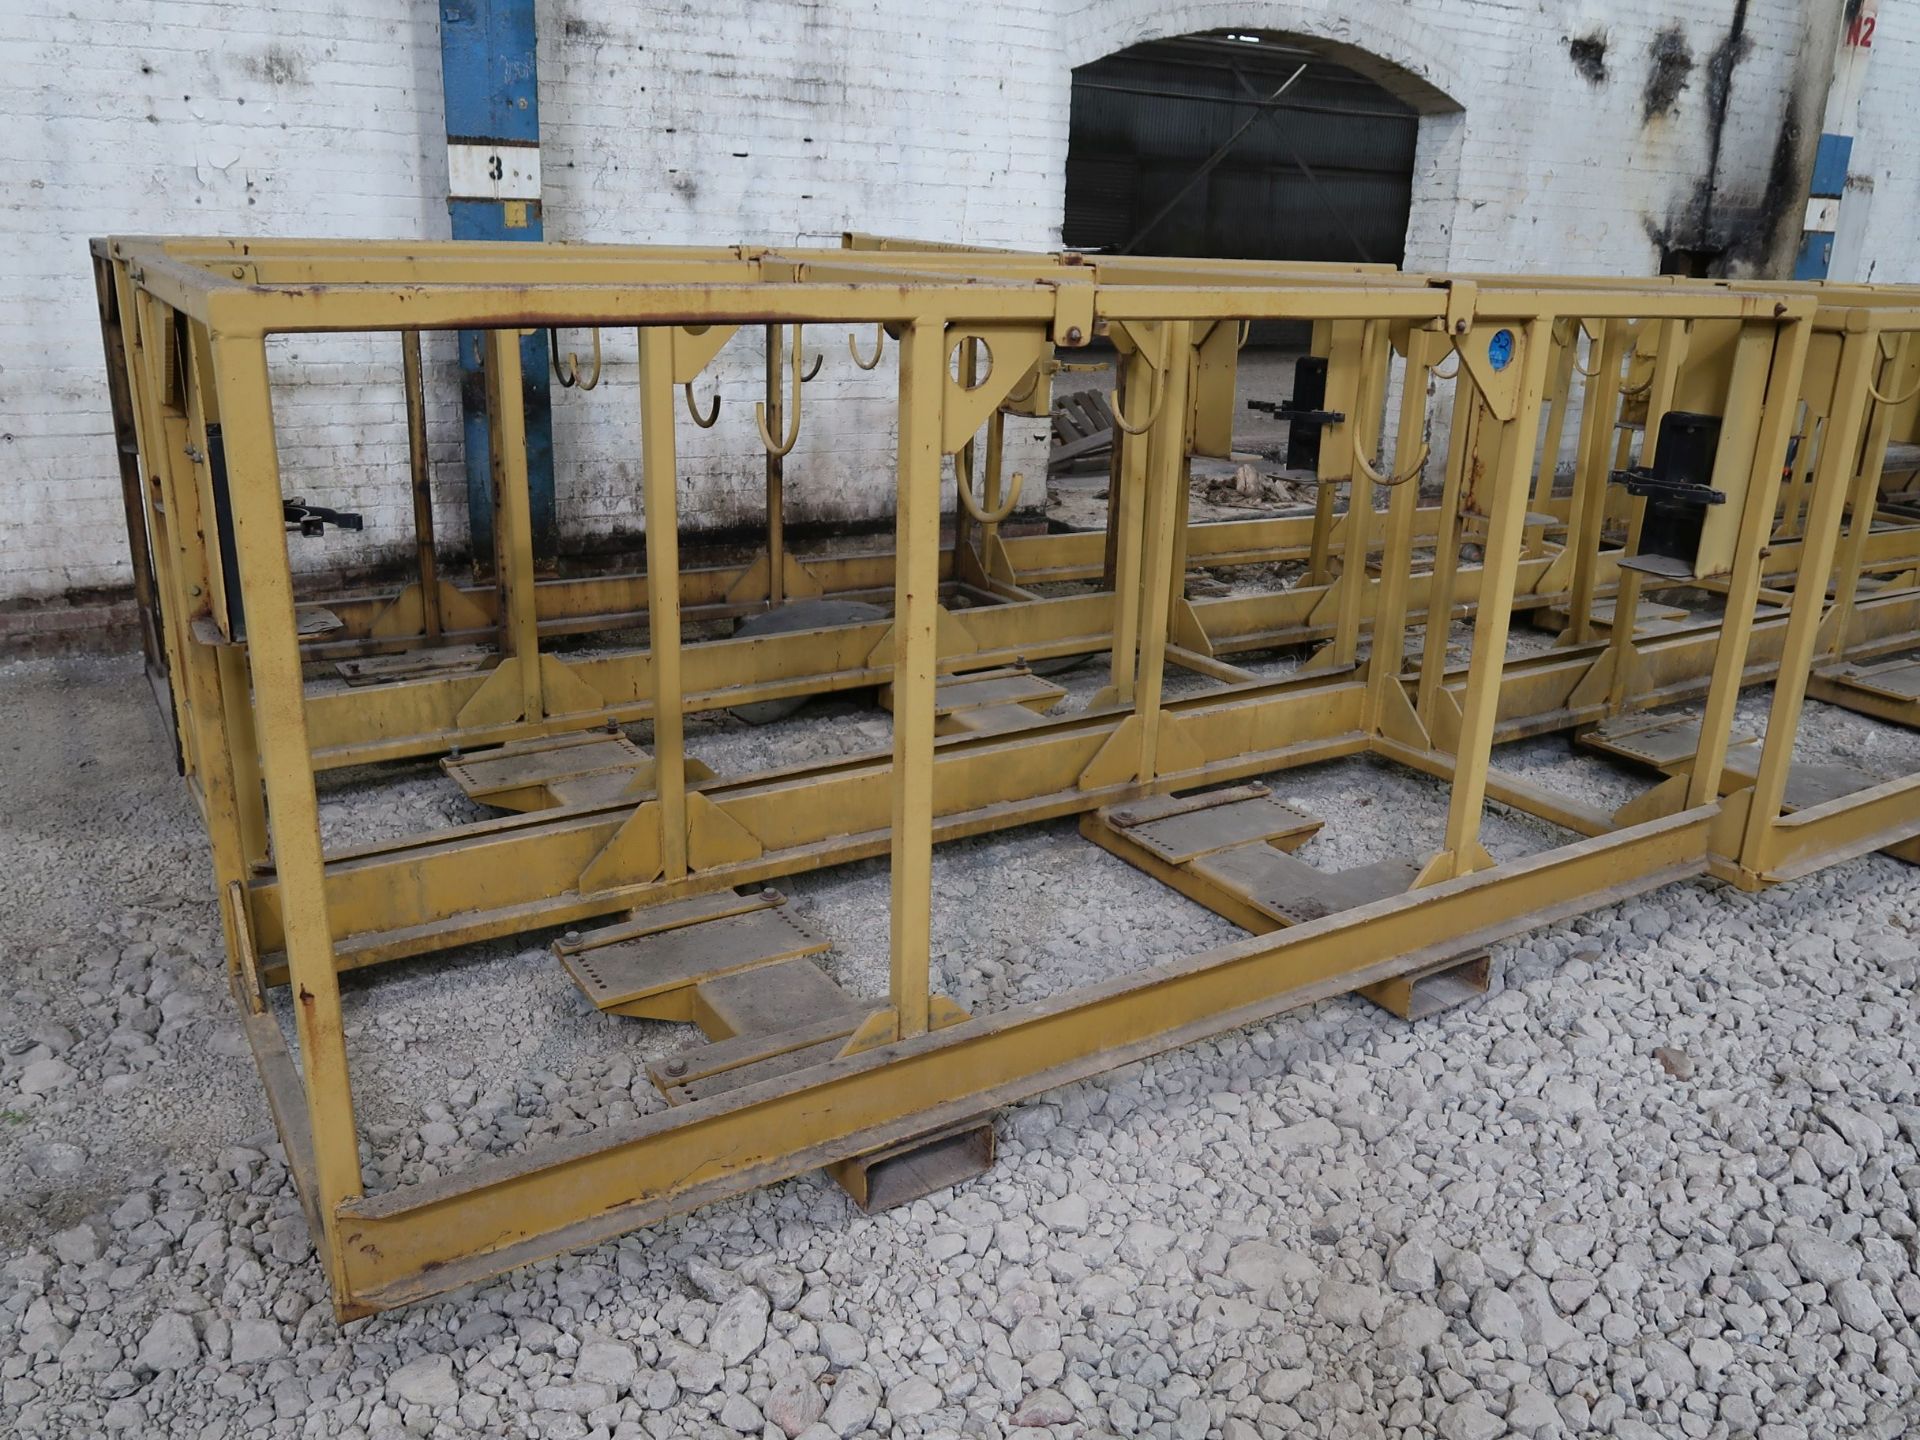 43" WIDE X 124" LONG WELDING EQUIPMENT CARRIERS - Image 3 of 3